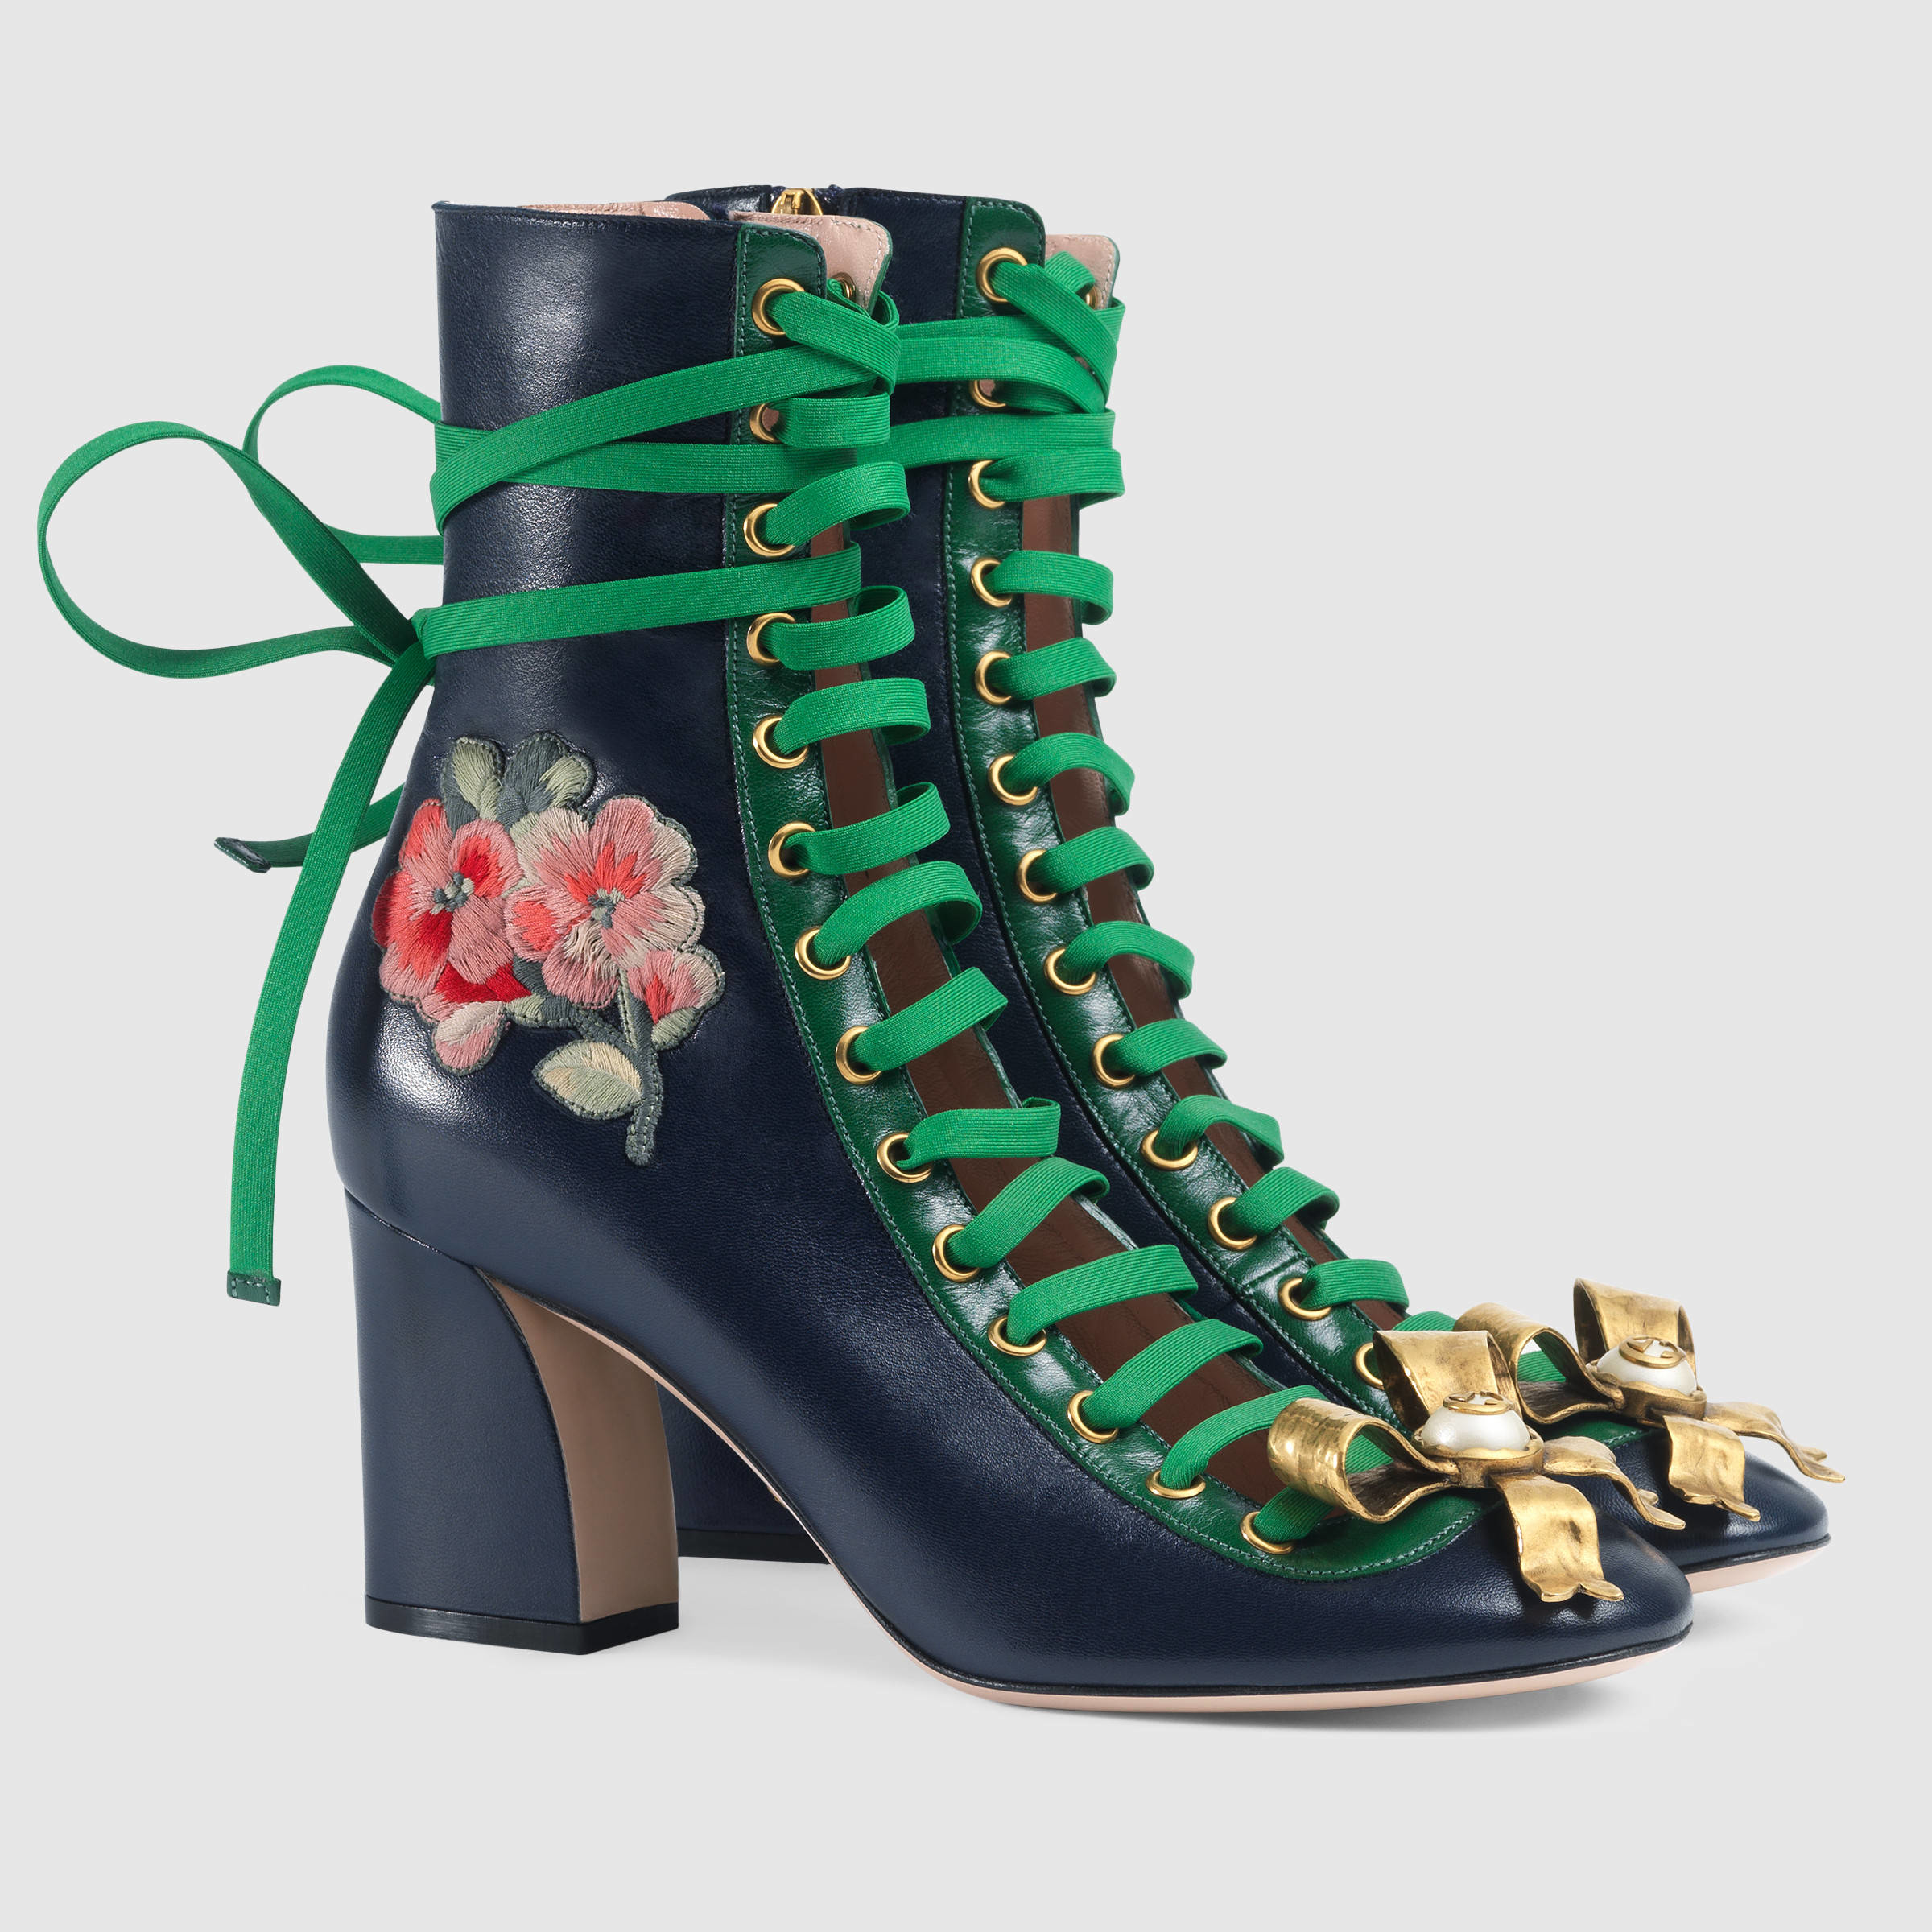 Lyst - Gucci Finnlay Leather Ankle Boot